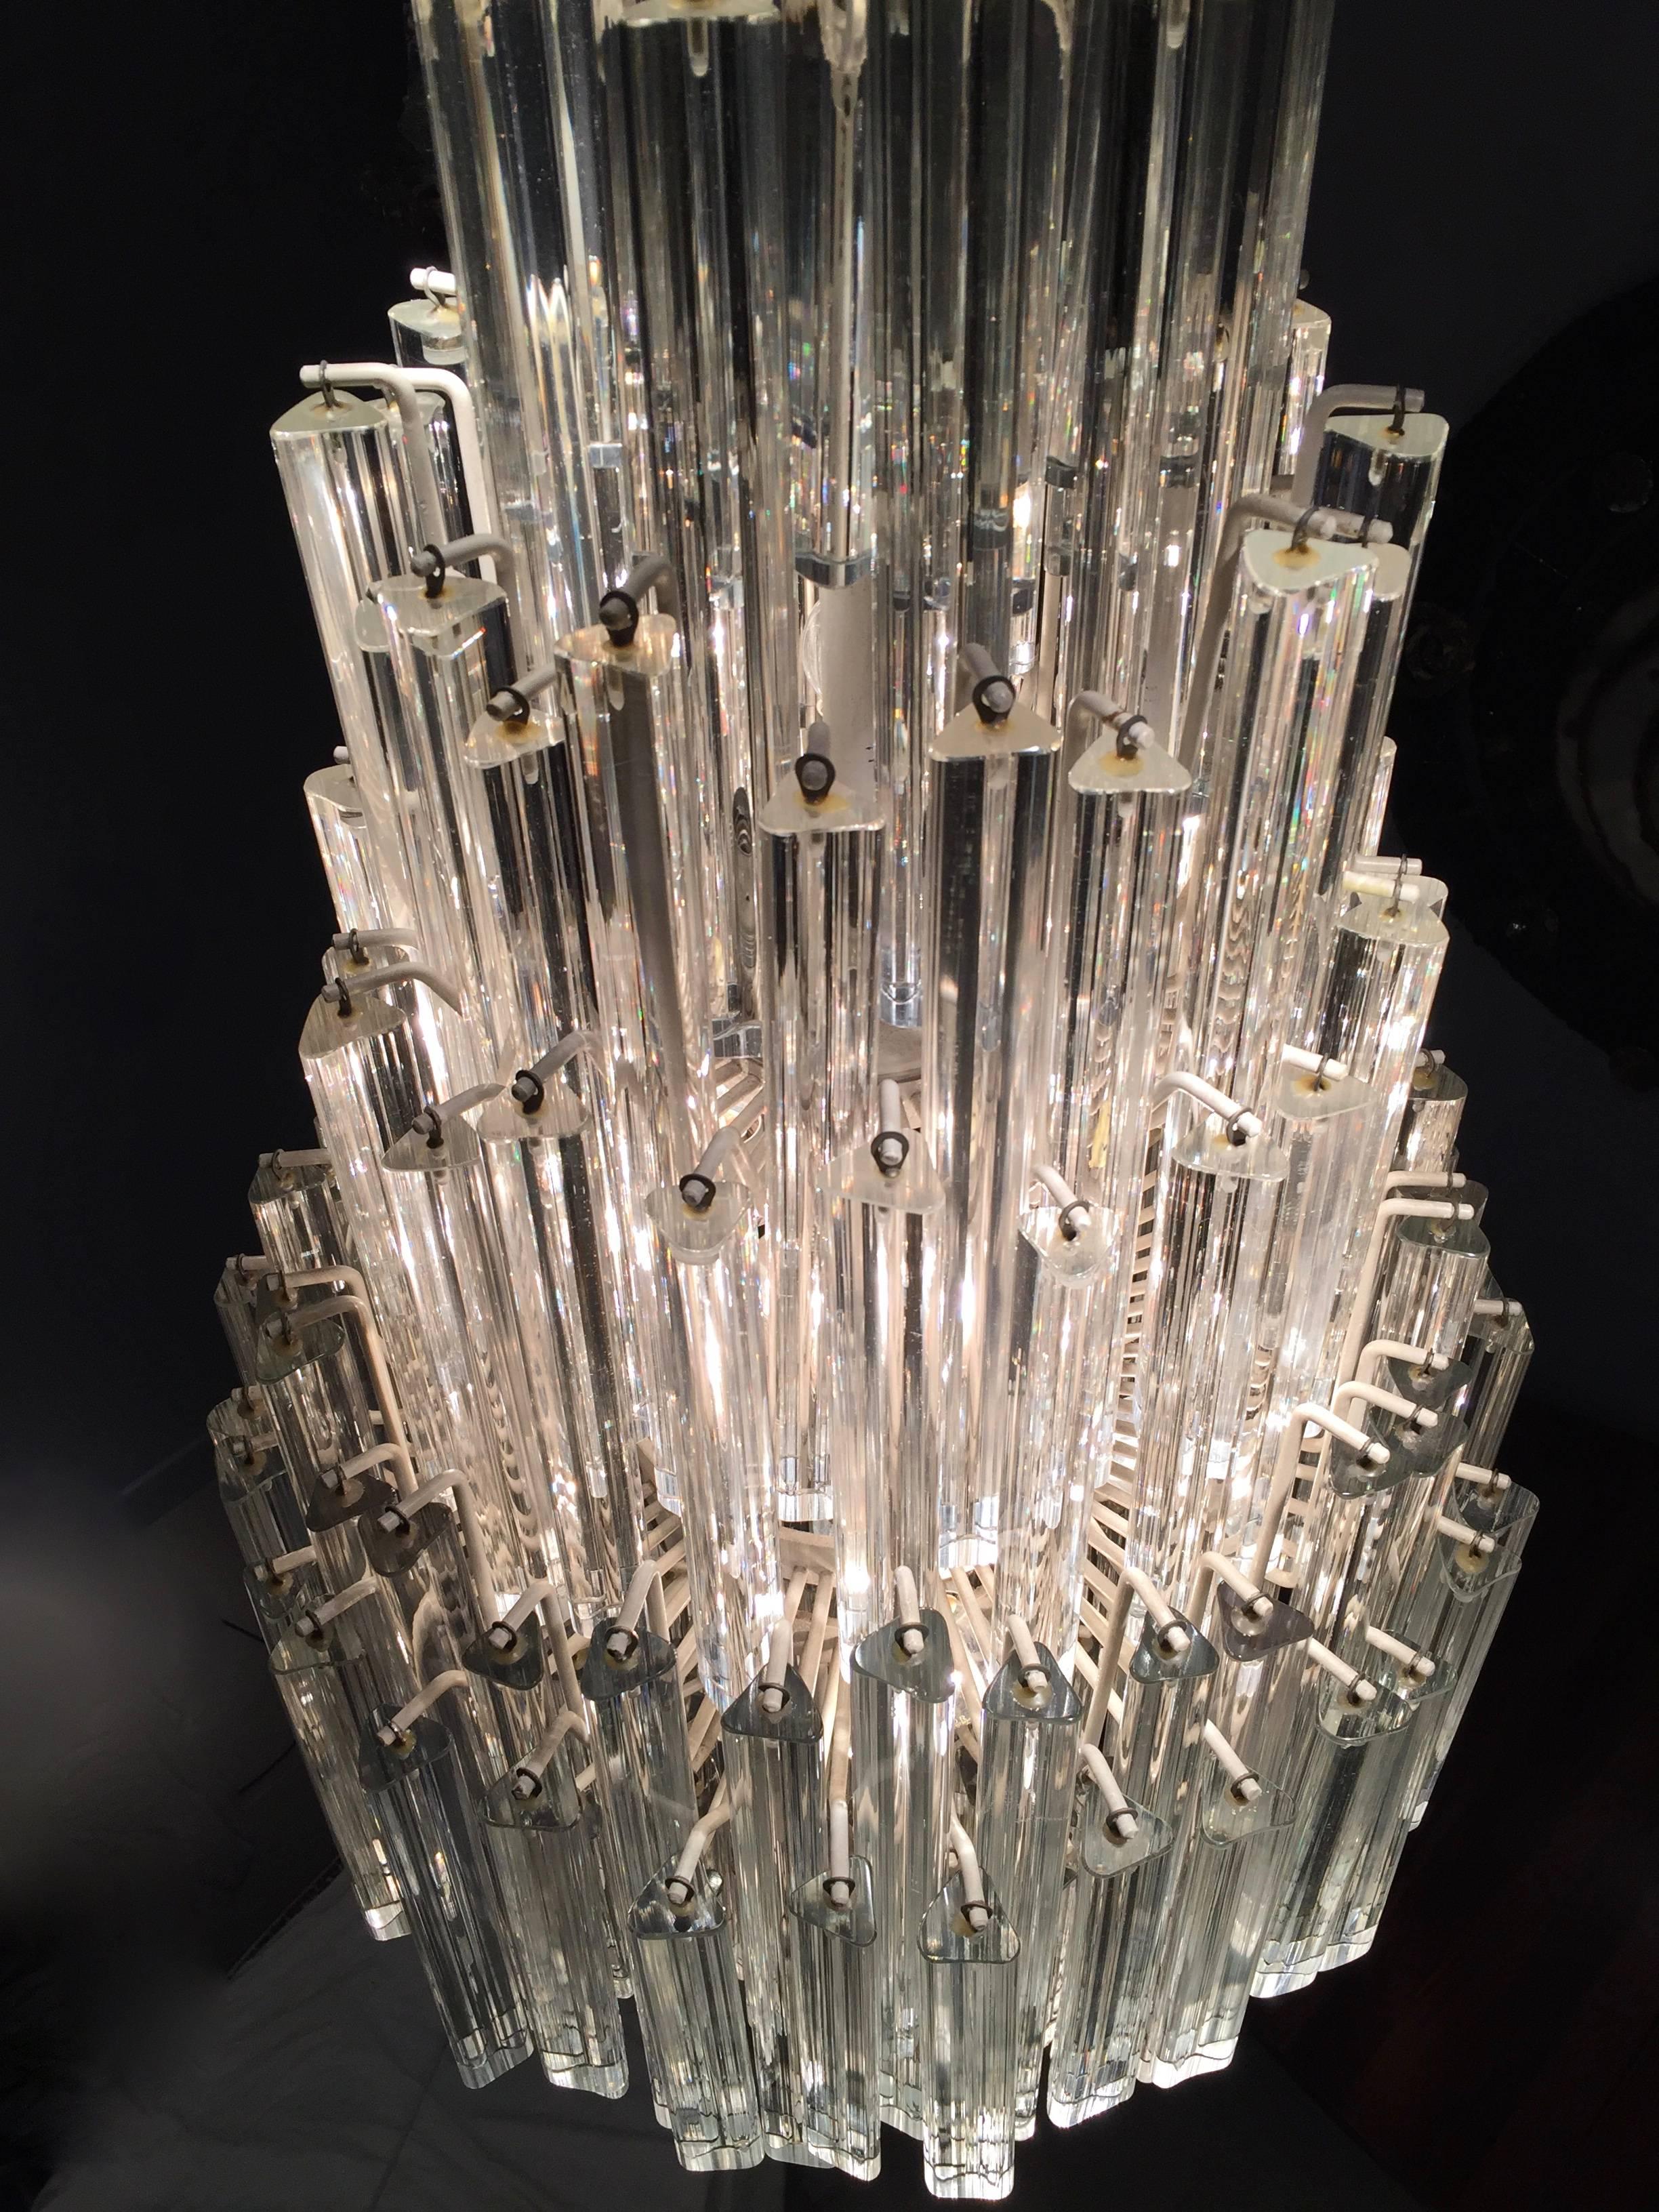 Rare model with characteristic shape. 100% authentic Venini glass chandelier acquired from the first owner with original spare parts. Chandelier from the 